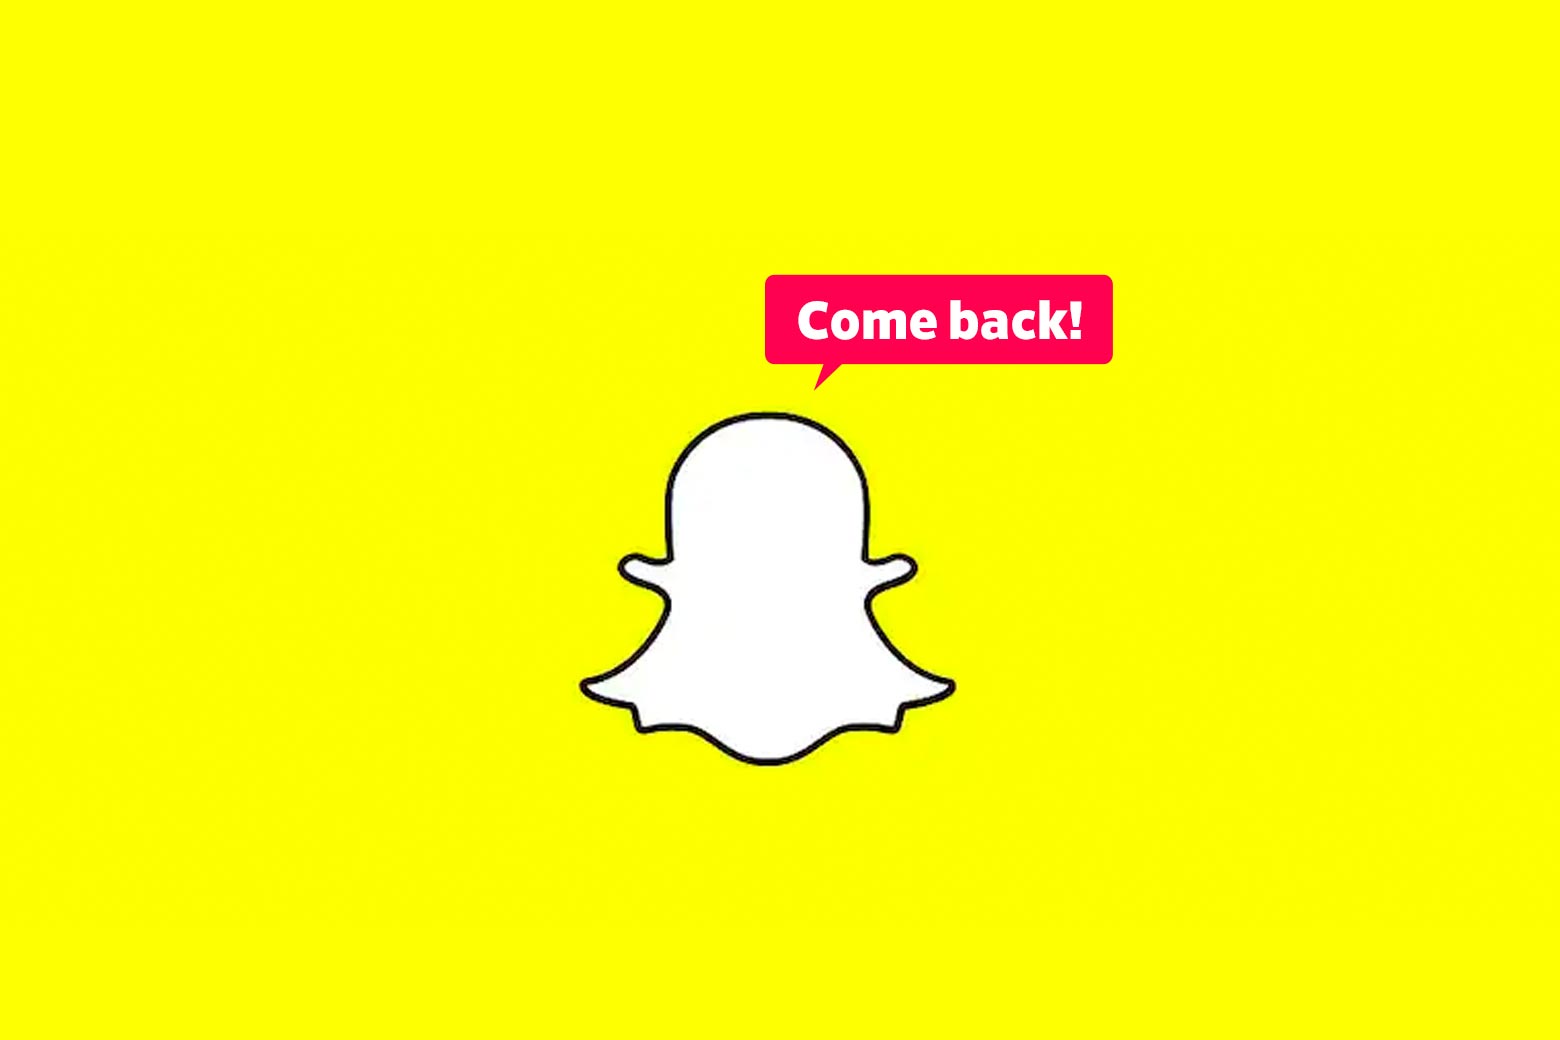 The Snapchat ghost logo saying, "Come back!"